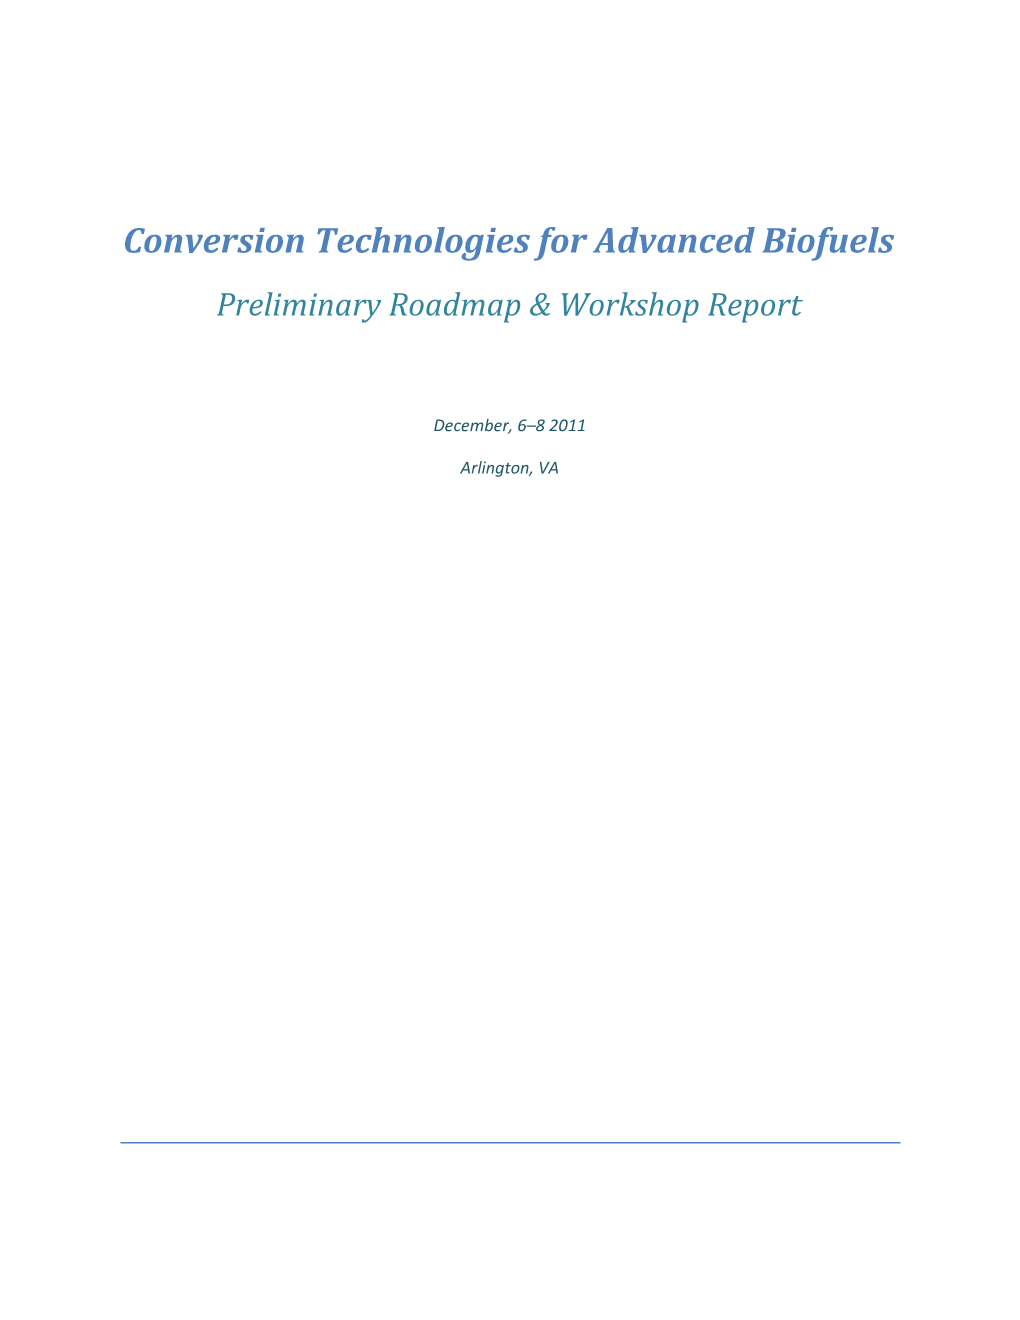 Conversion Technologies for Advanced Biofuels